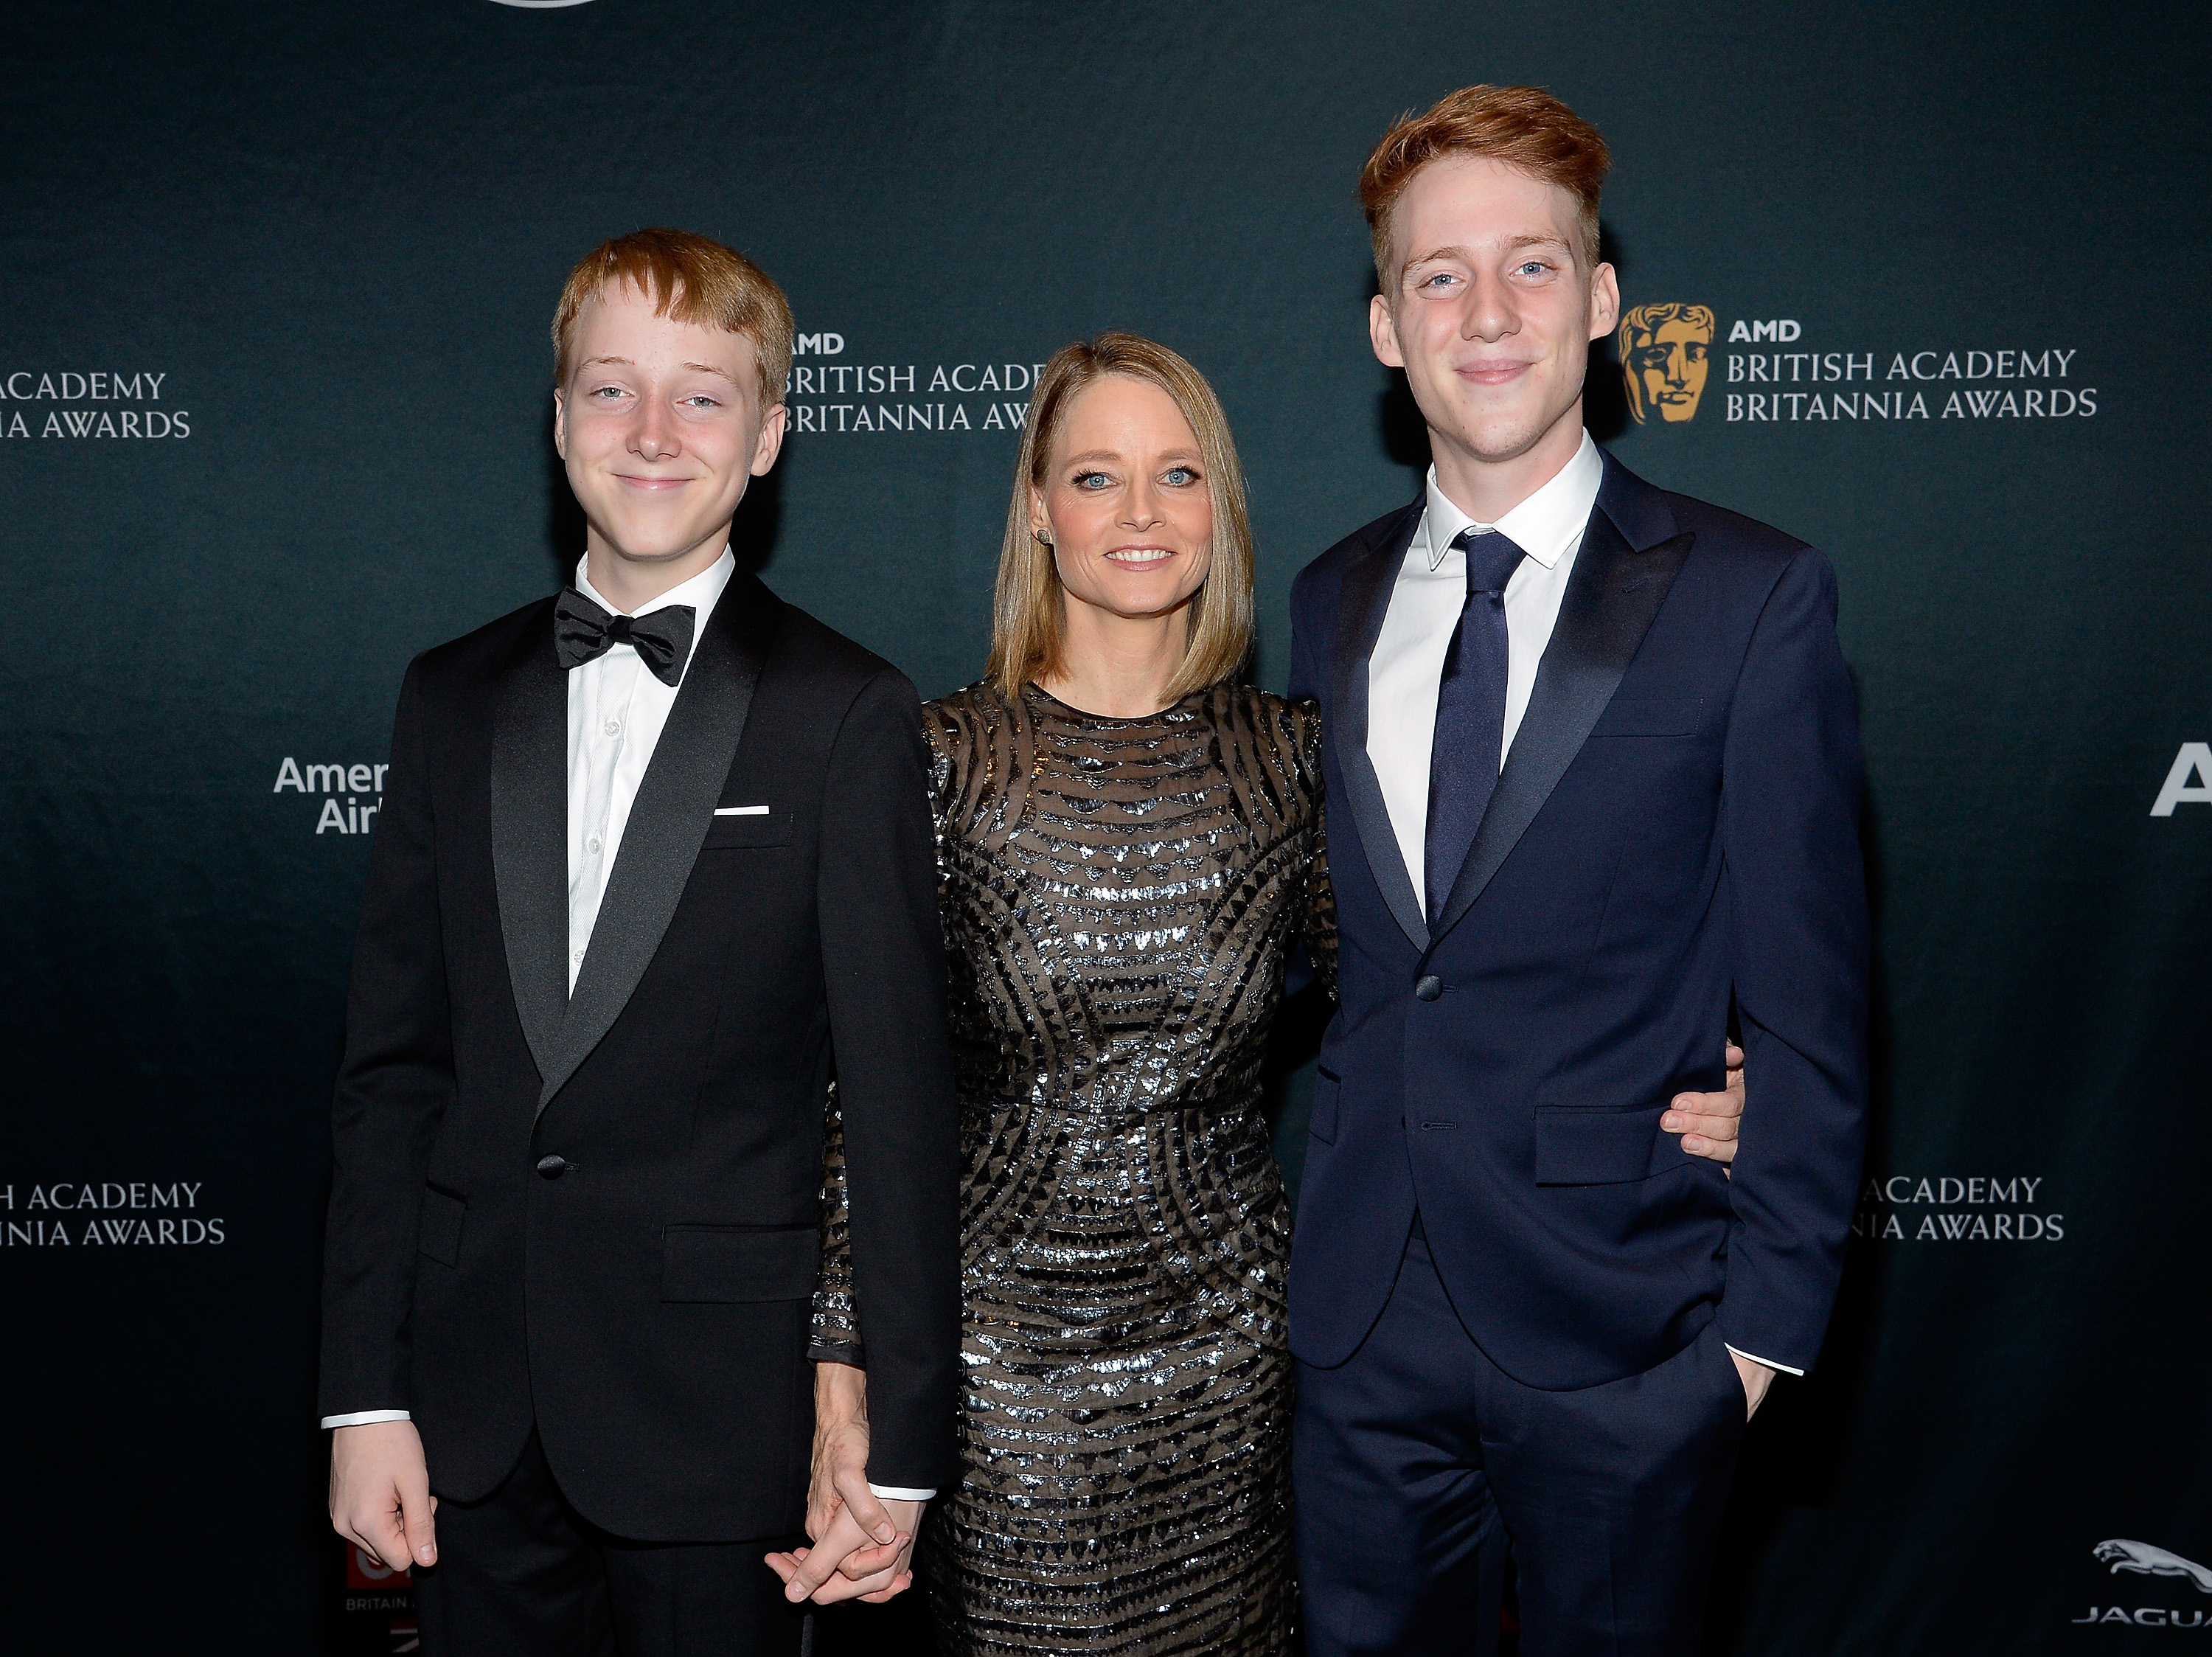 Jodie Foster with her sons Kit and Charles at the AMD British Academy Britannia Awards in Beverly Hills, California on October 28, 2016 | Source: Getty Images